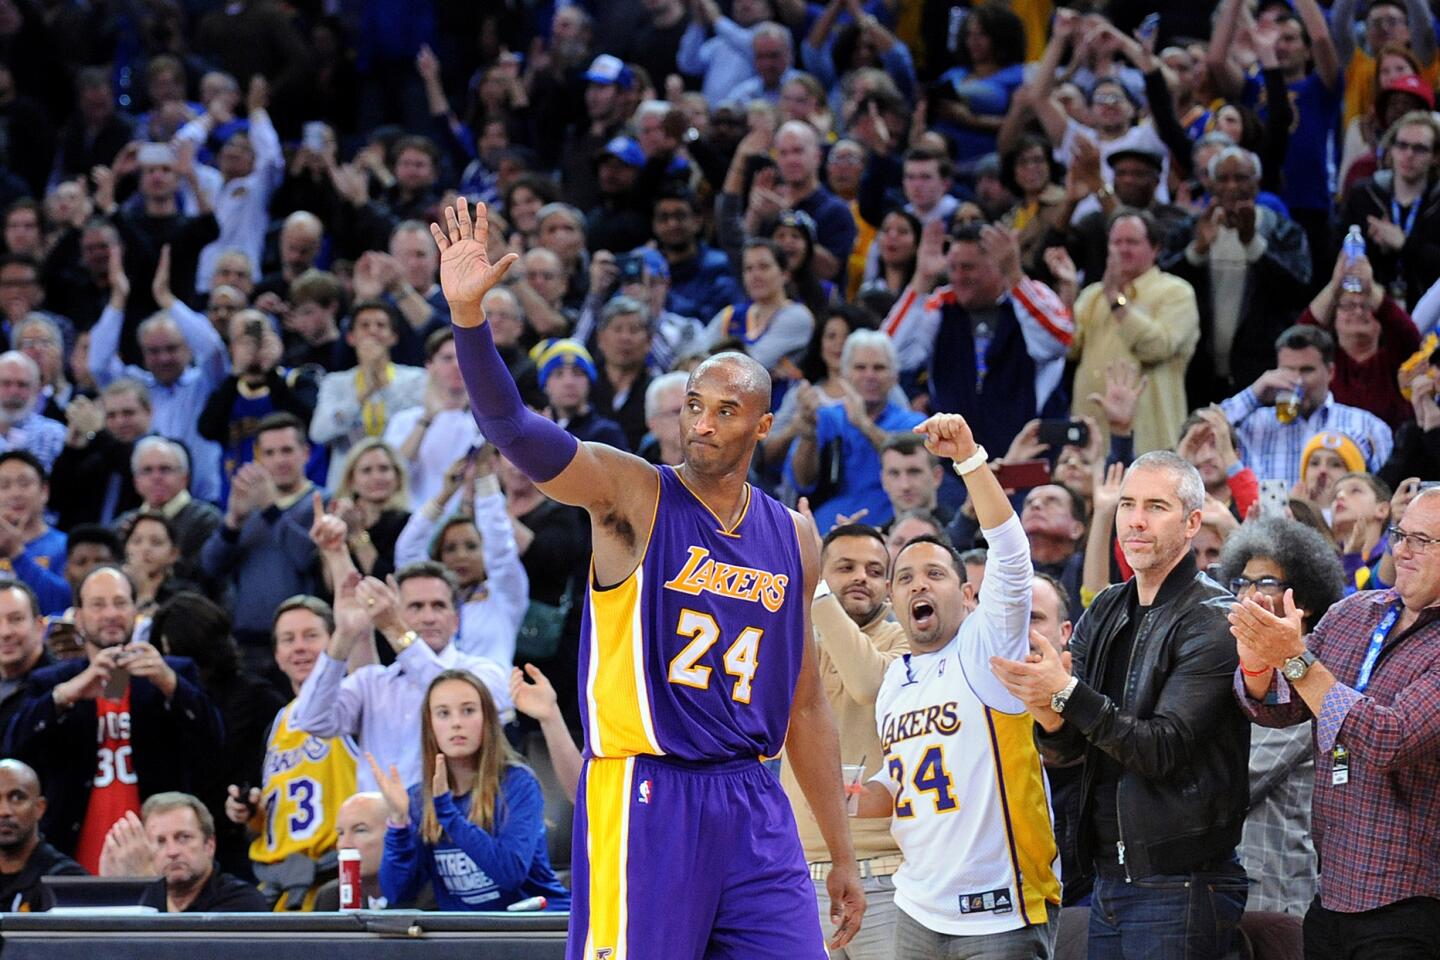 Lakers forwardKobe Bryant gets a standing ovation from the crowd at Oracle Arena as he exits a game against the Warriors on Jan. 14, 2016.